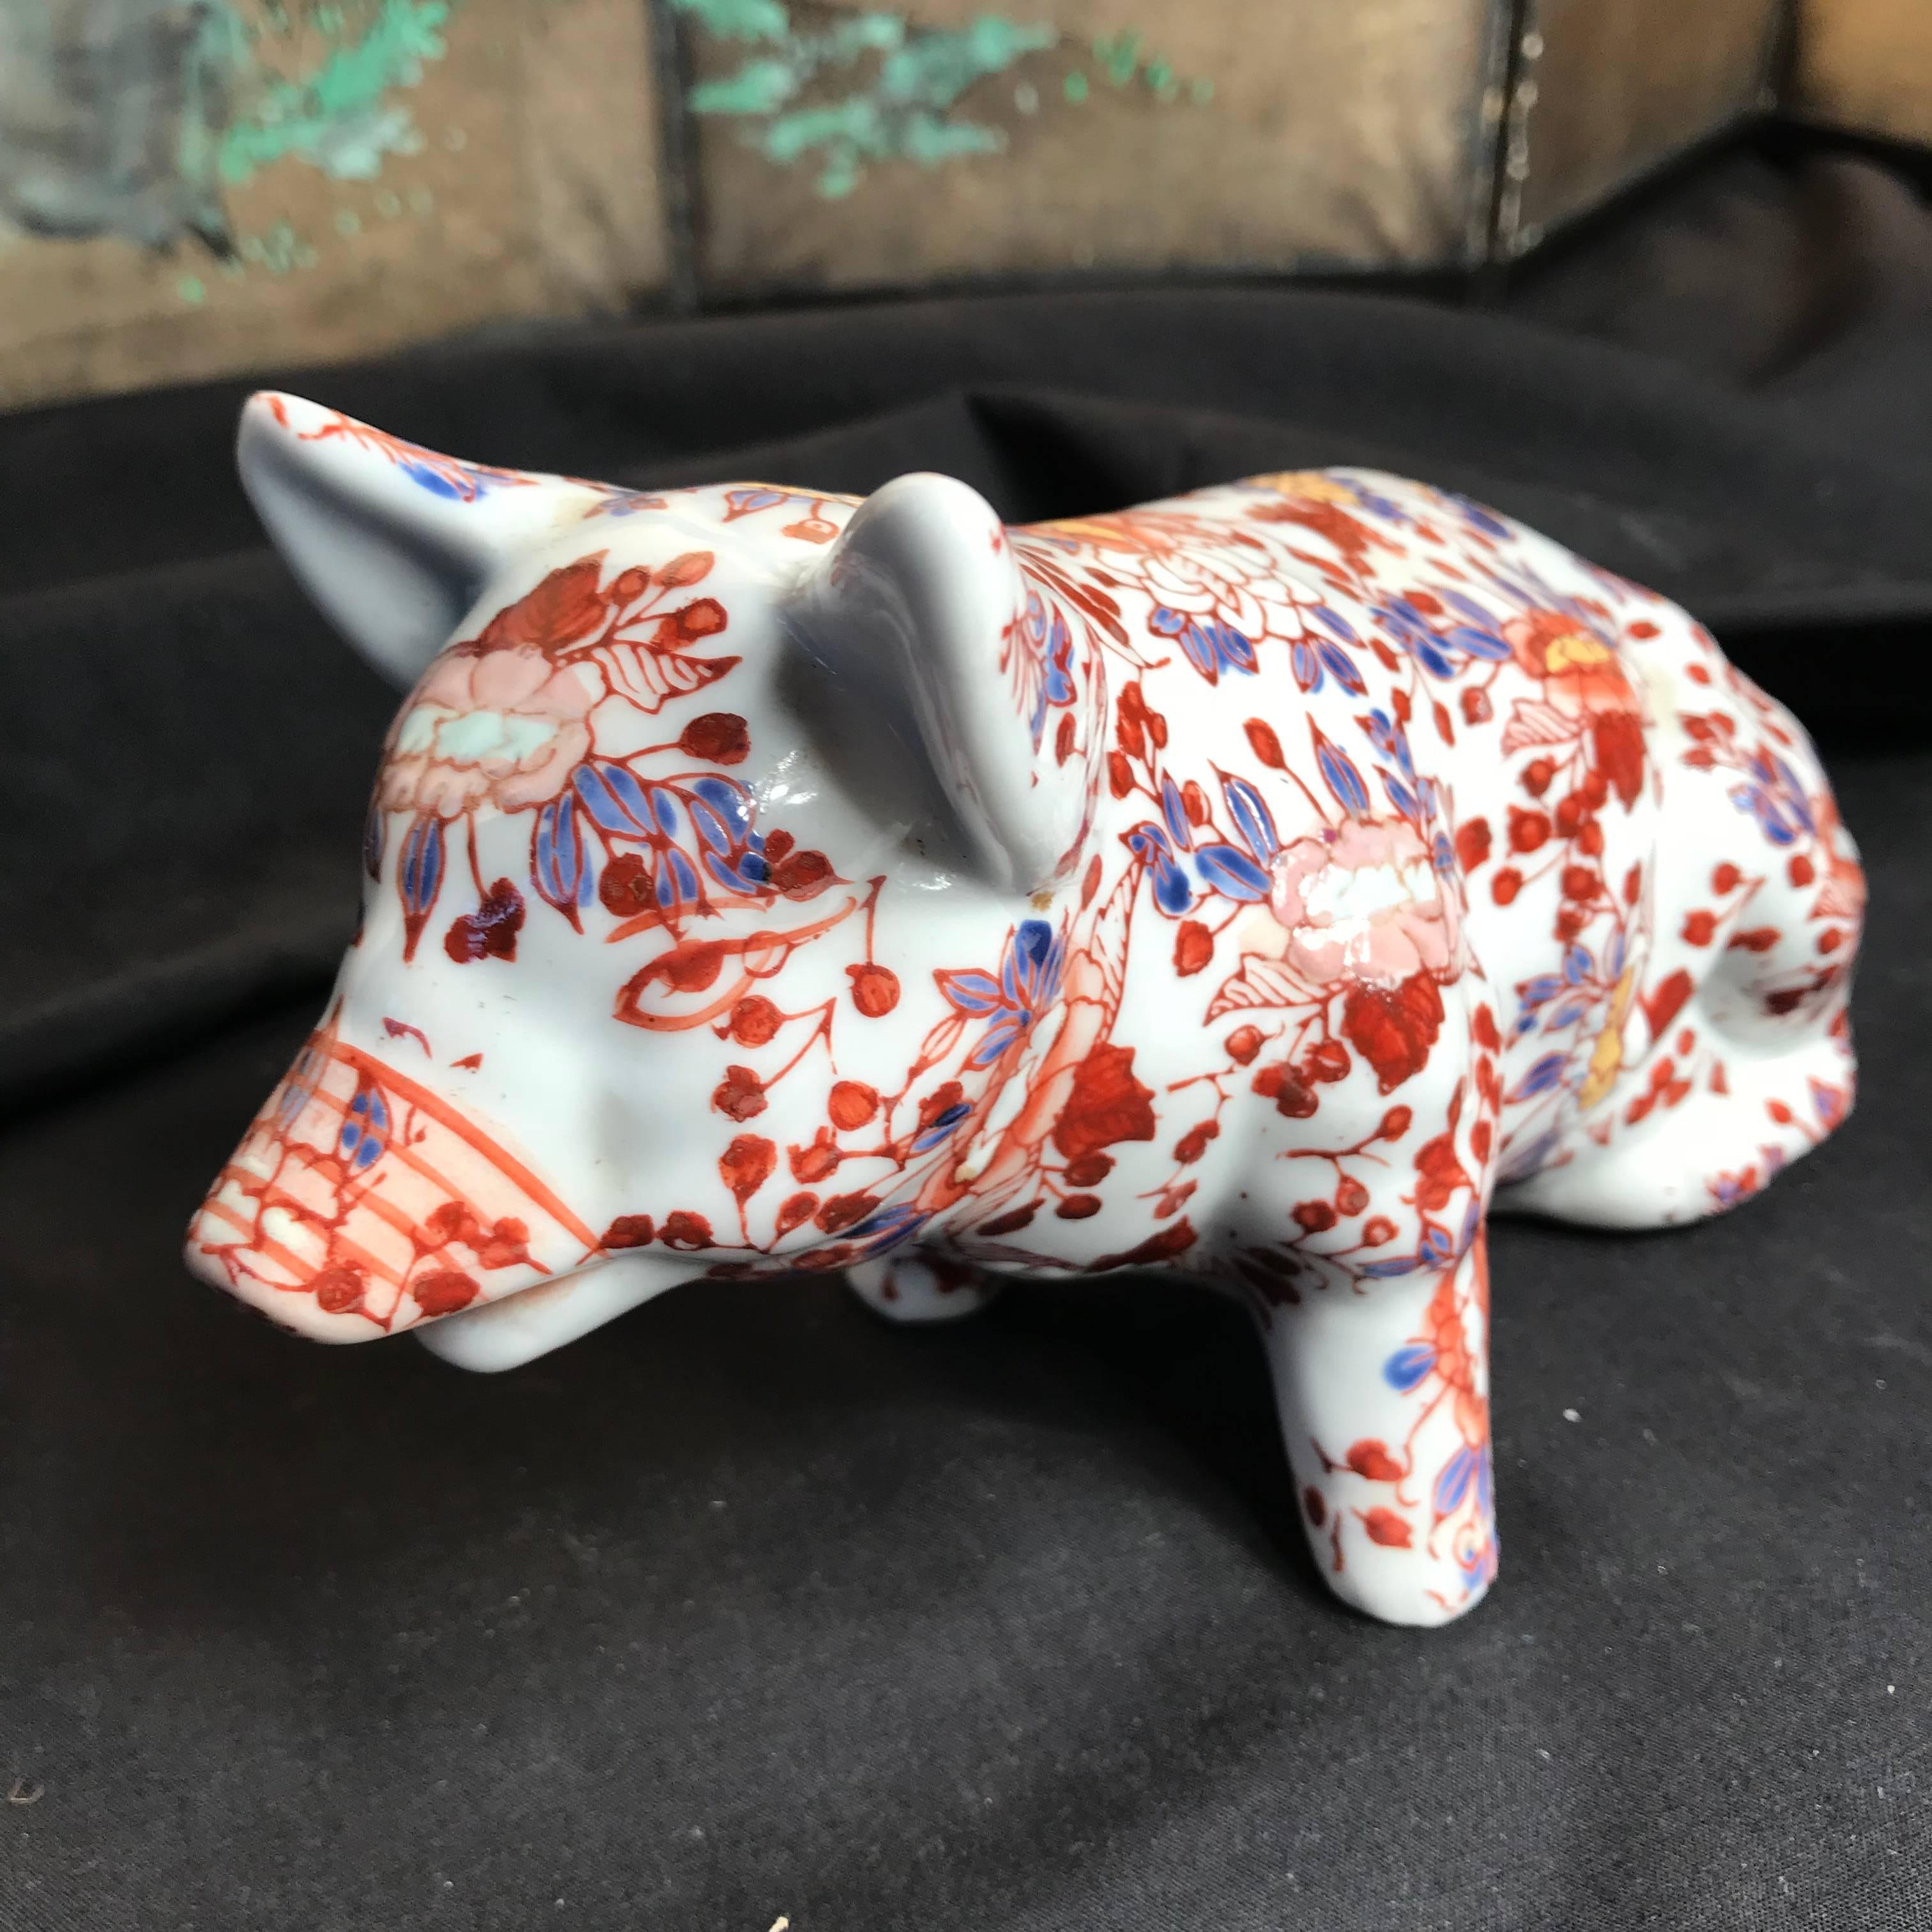 Japanese red enameled porcelain boar or pig, sculpture Okimono 

Maker: Imari red enamels over blue, yellow, and green under glazing

Dimensions: 4.5 inches tall and 7 inches length

A good sized sculpture.
Hand enameled.
Handcrafted.
Only one.